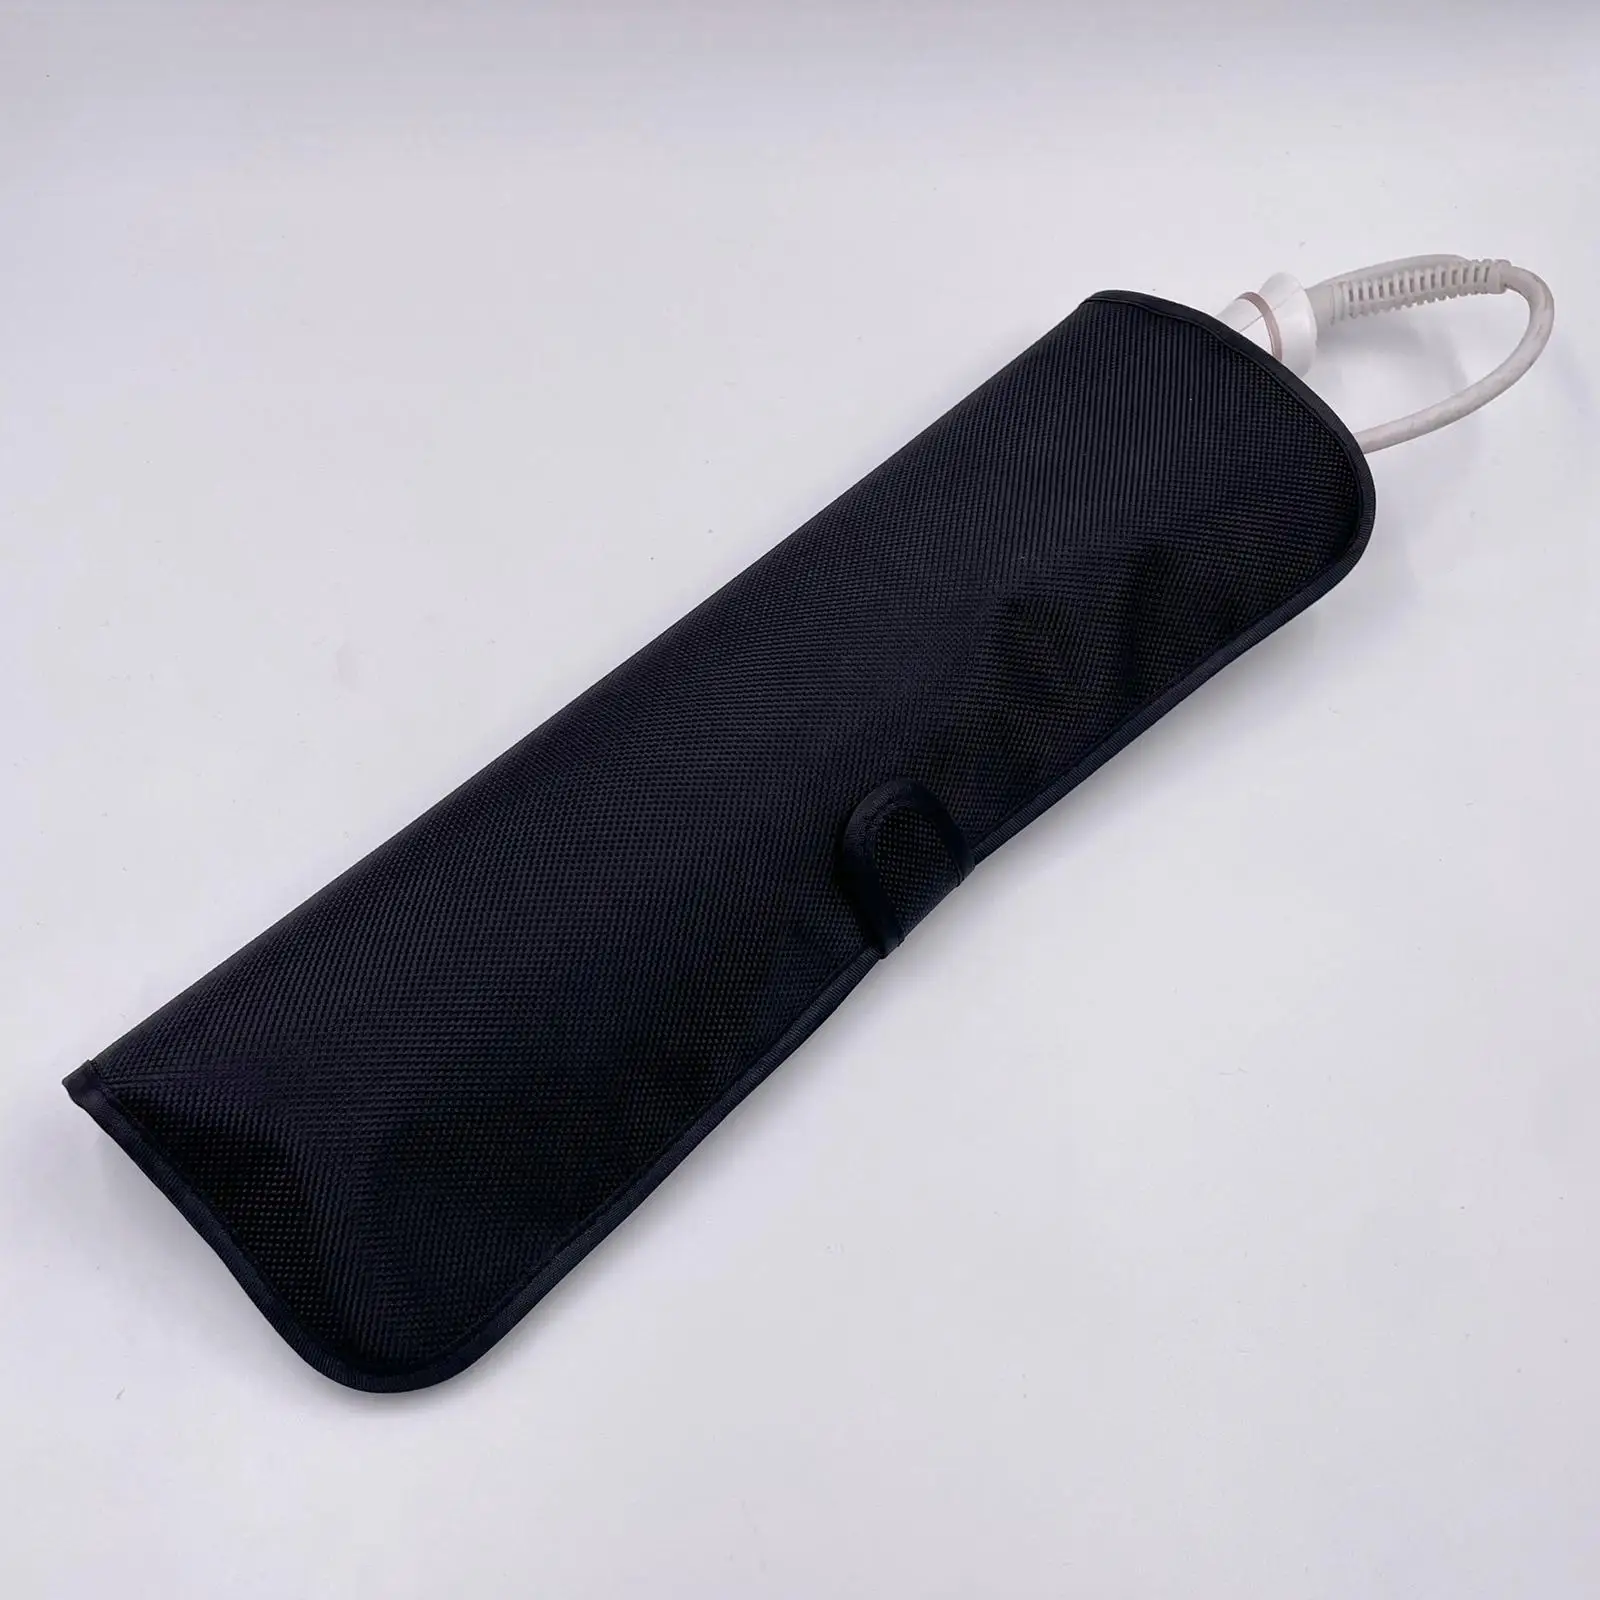 Curling Iron Cover Sleeve Universal Oxford Cloth Flat Iron Travel Case for Styling Irons Flat Iron Combs Scissors Clippers